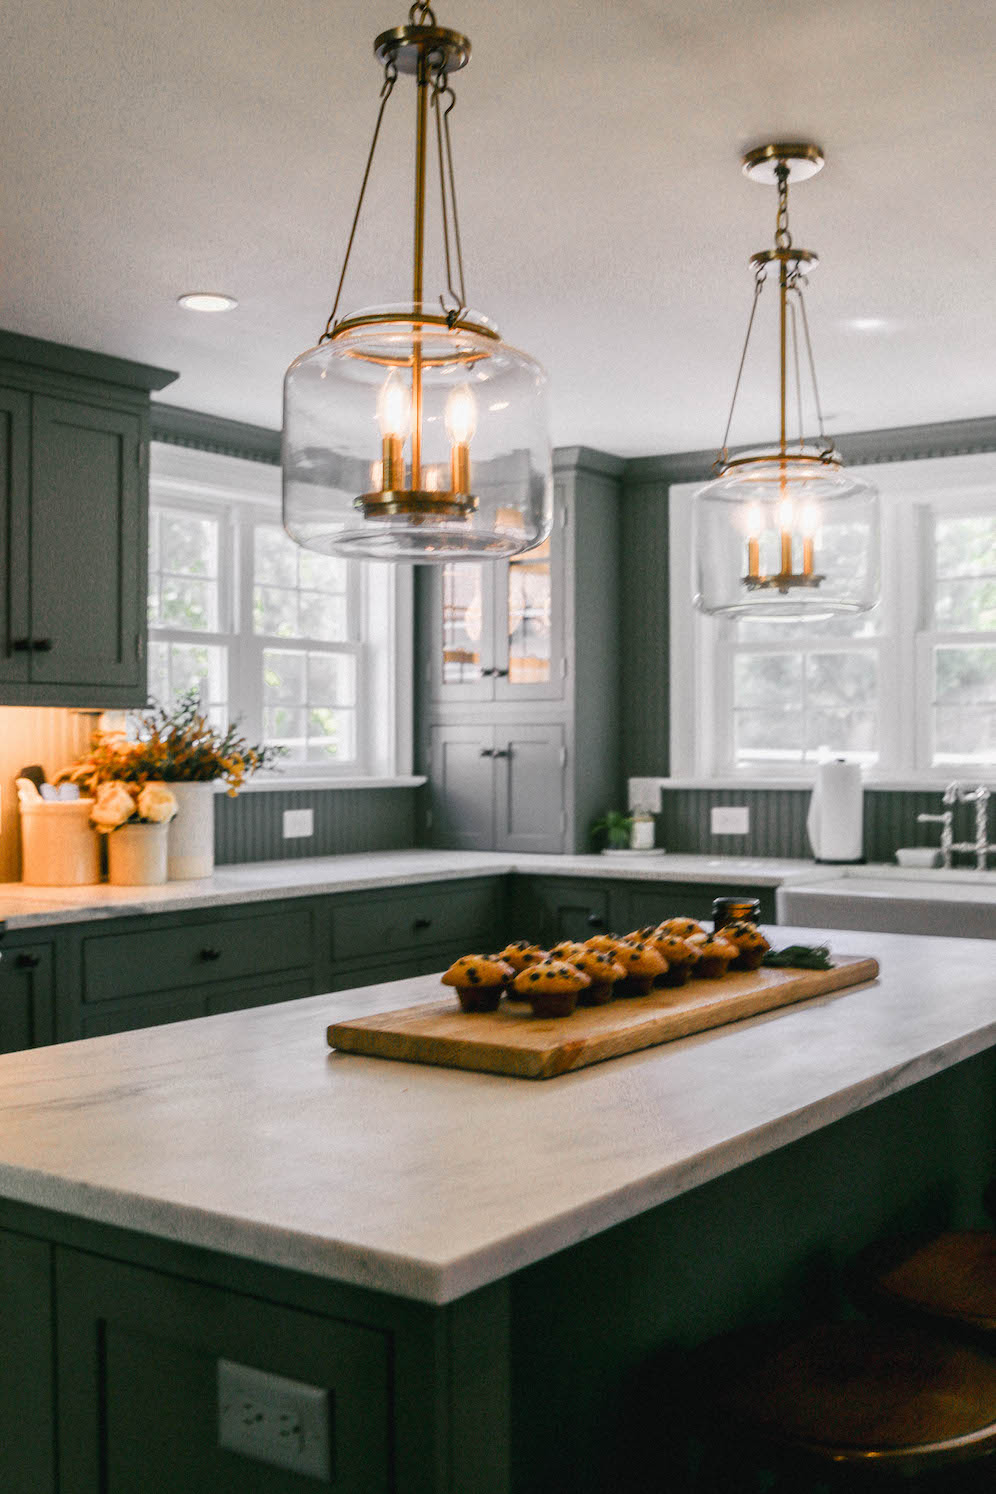 Mixing Hardware Metals In The Kitchen The Coastal Confidence by Aubrey Yandow